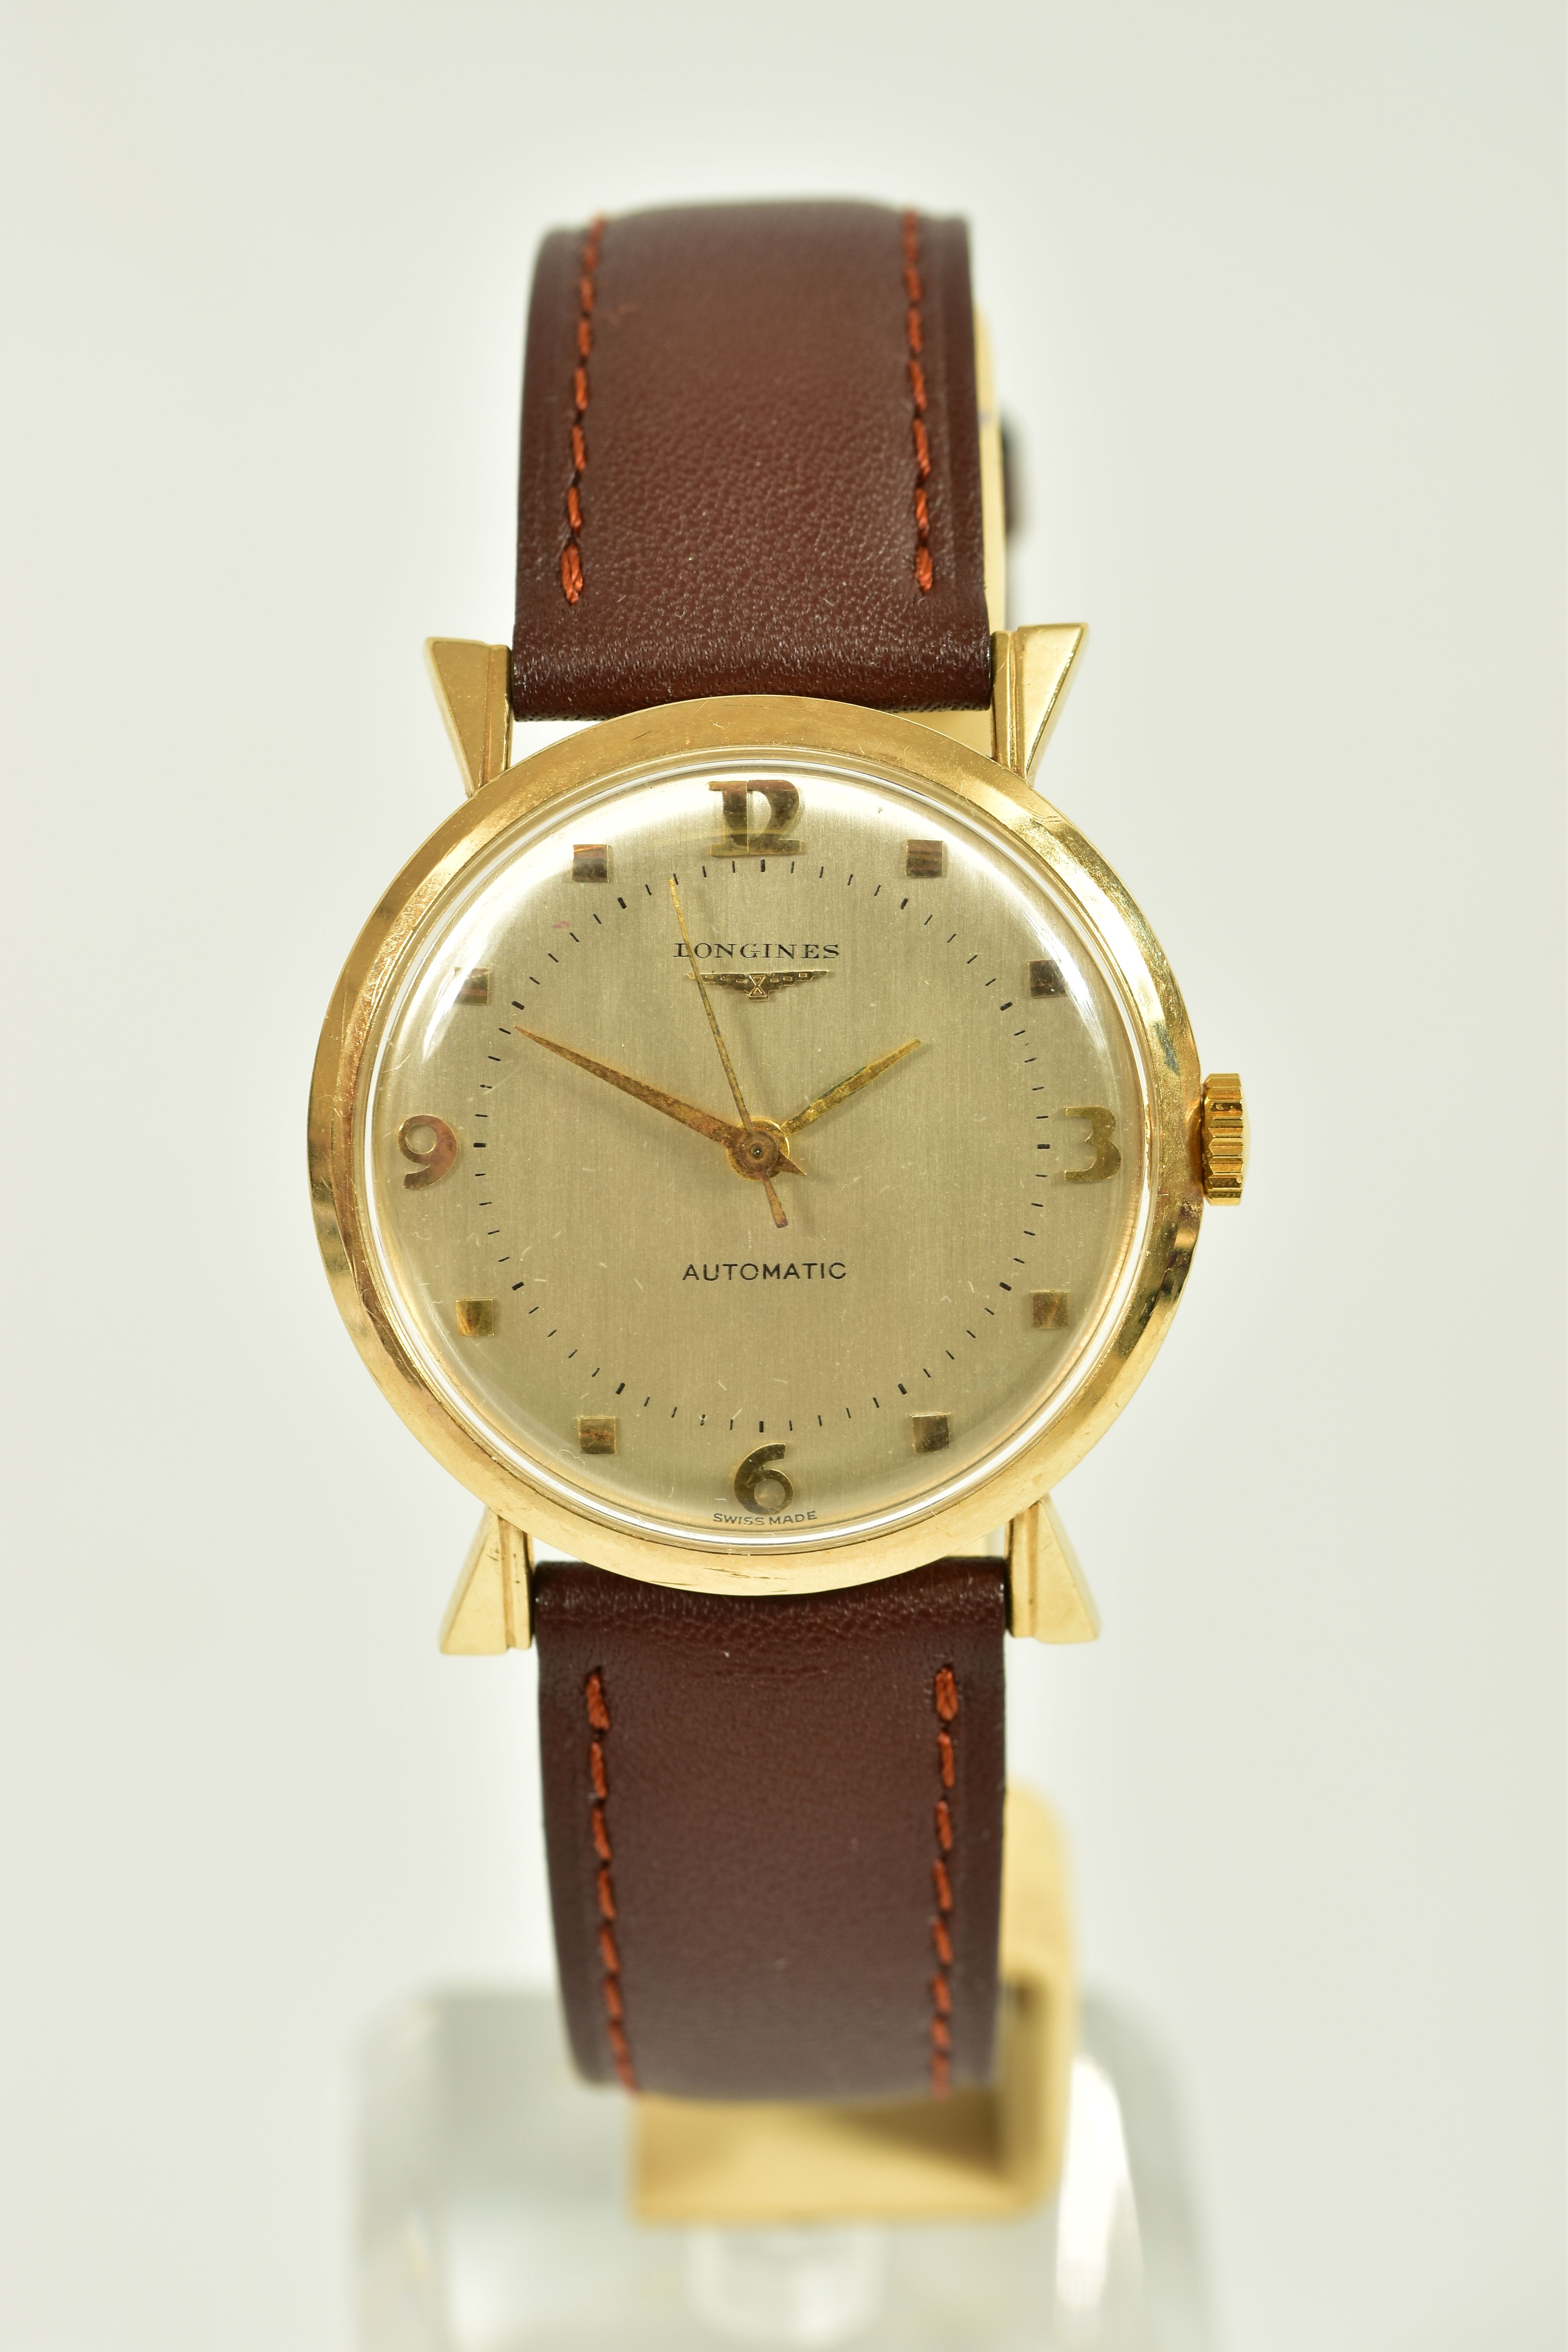 A 14CT LONGINES AUTOMATIC WRISTWATCH, silvered dial with Arabic numeral and dot markers, approximate